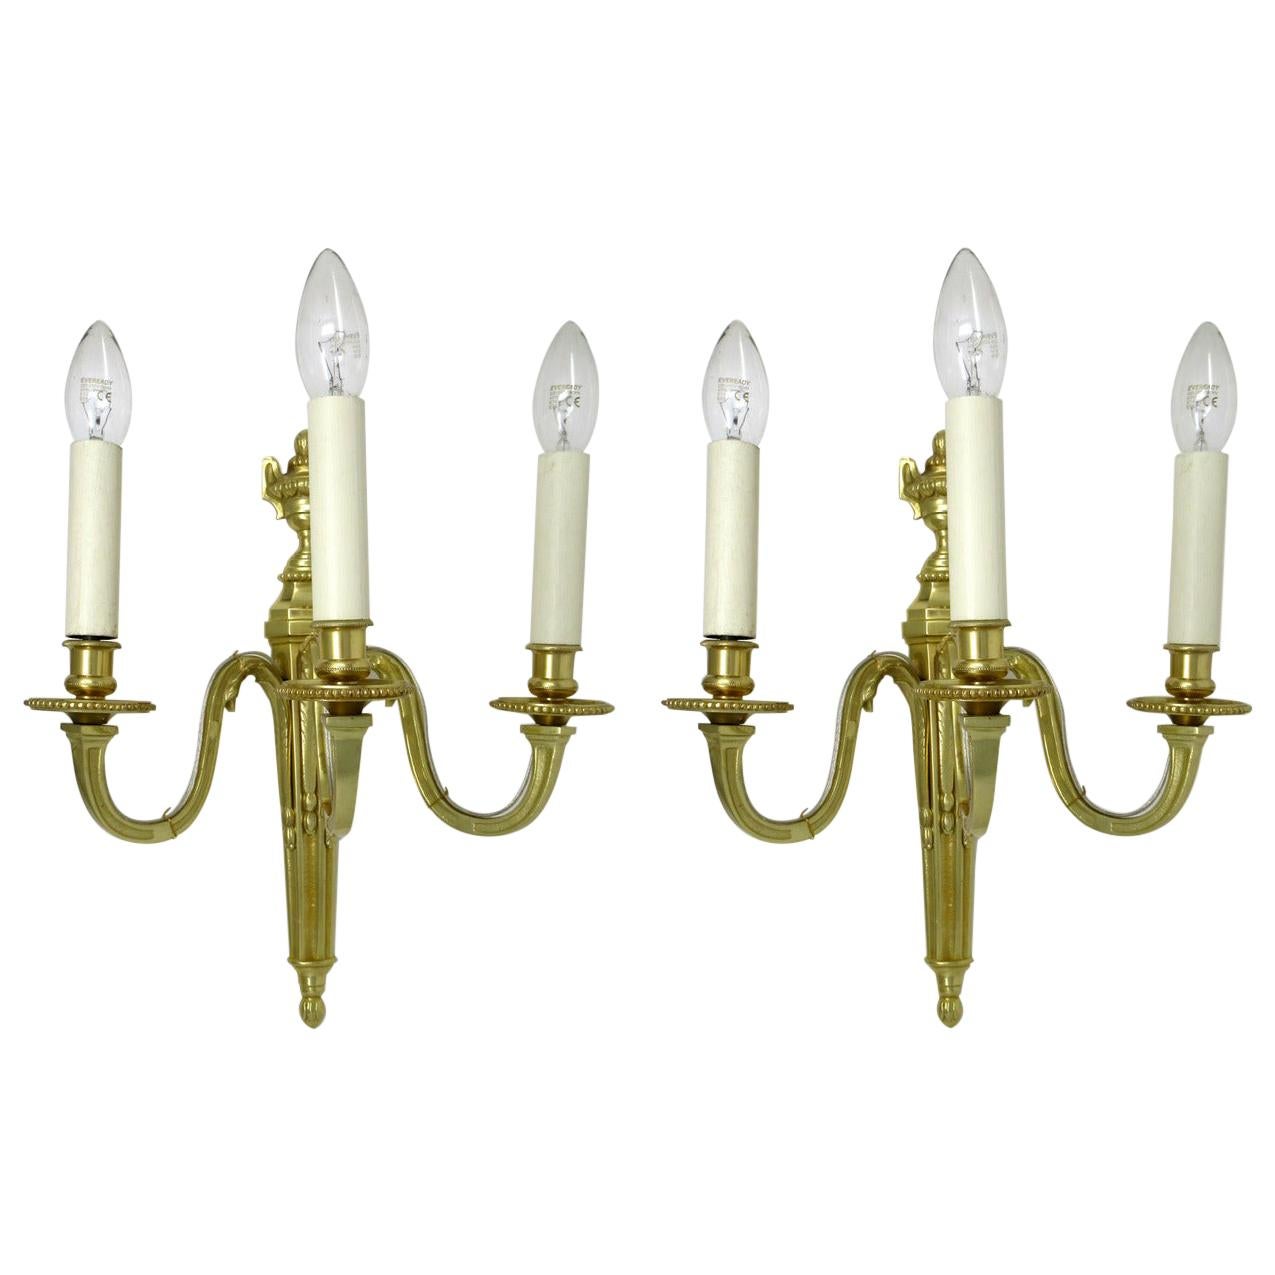 Antique Pair of English Gilt Bronze Three Light Wall Candle Sconces 19th Century